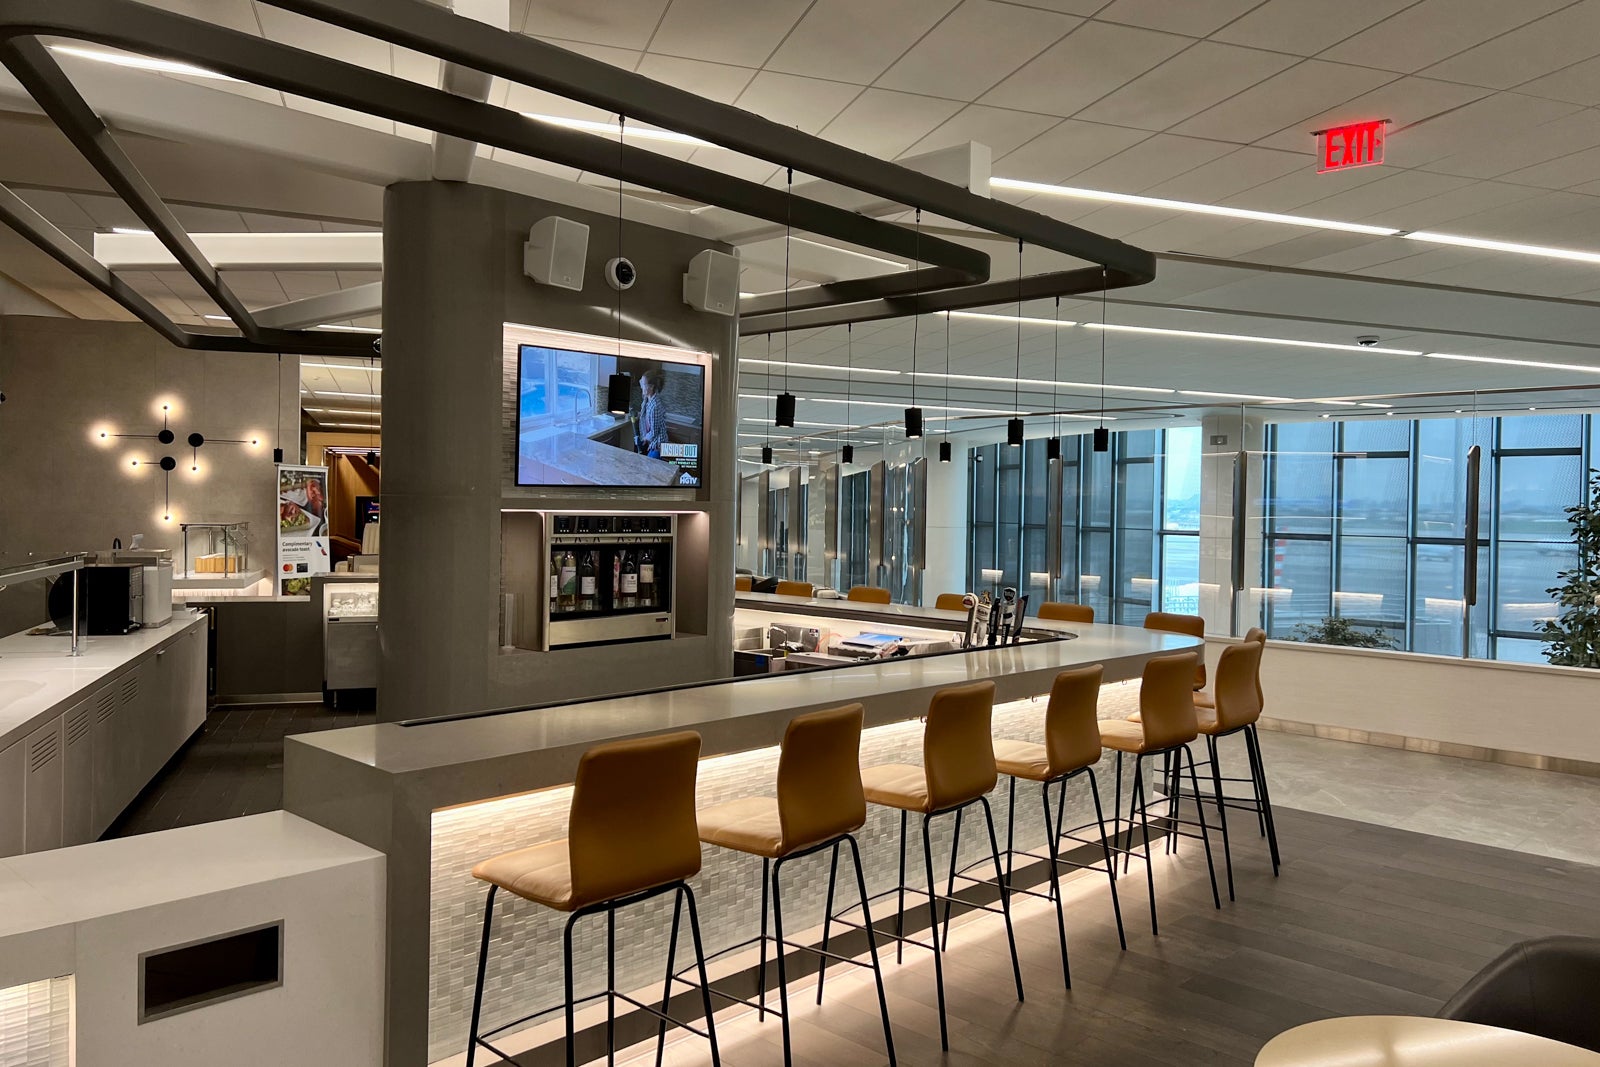 American Airlines Admirals Club membership guide - The Points Guy